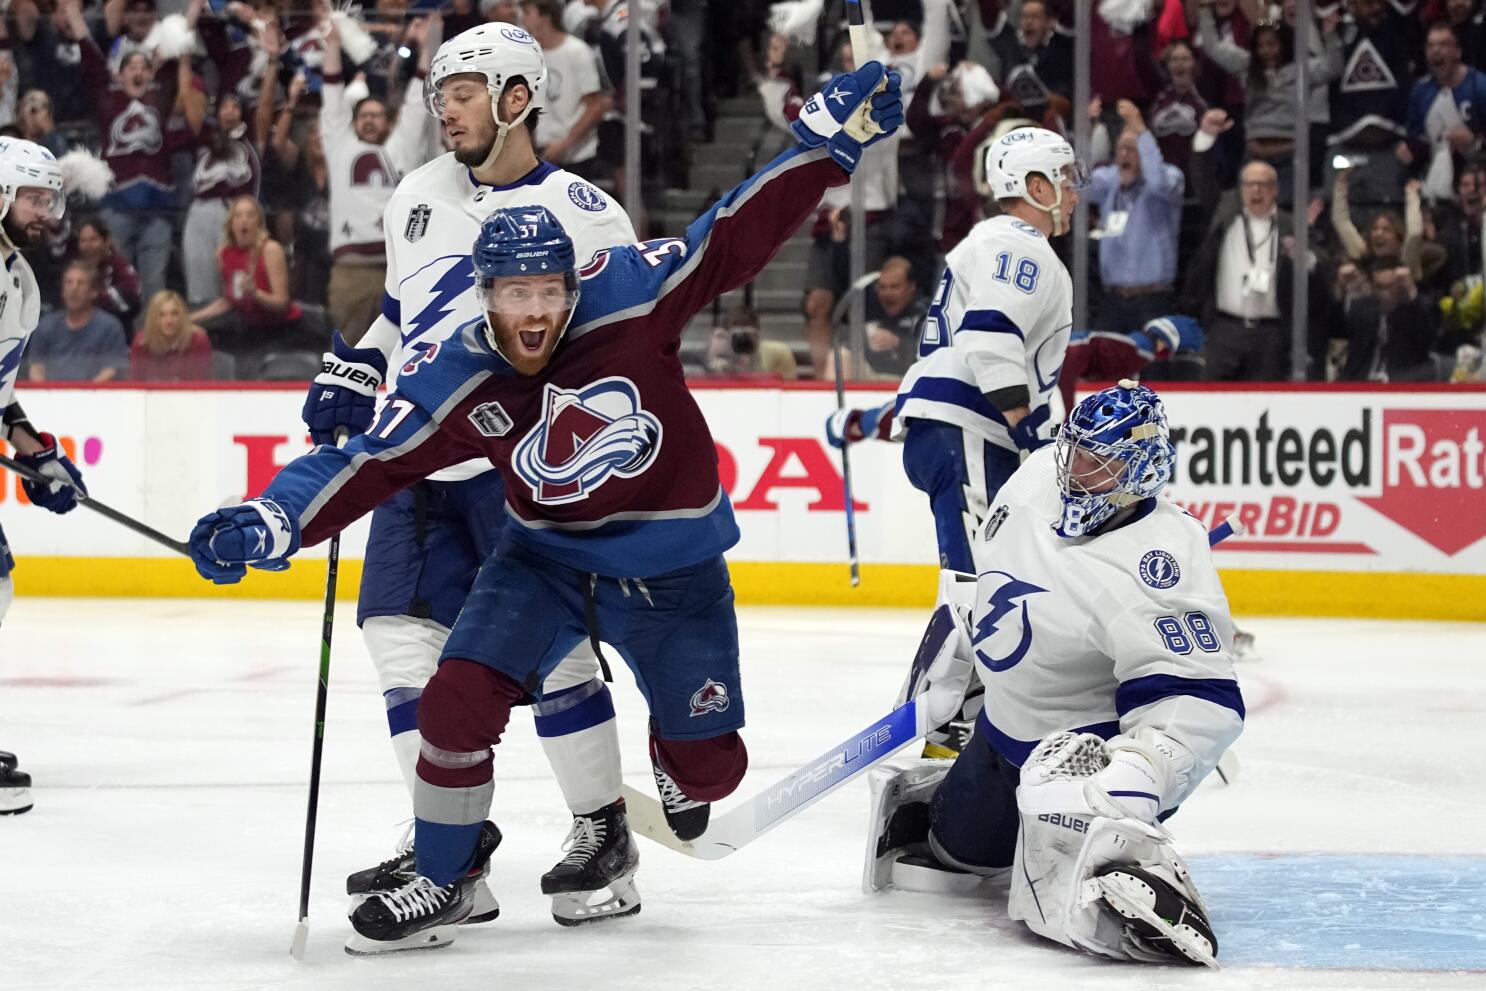 Colorado Avalanche win third Stanley Cup title, beating two-time